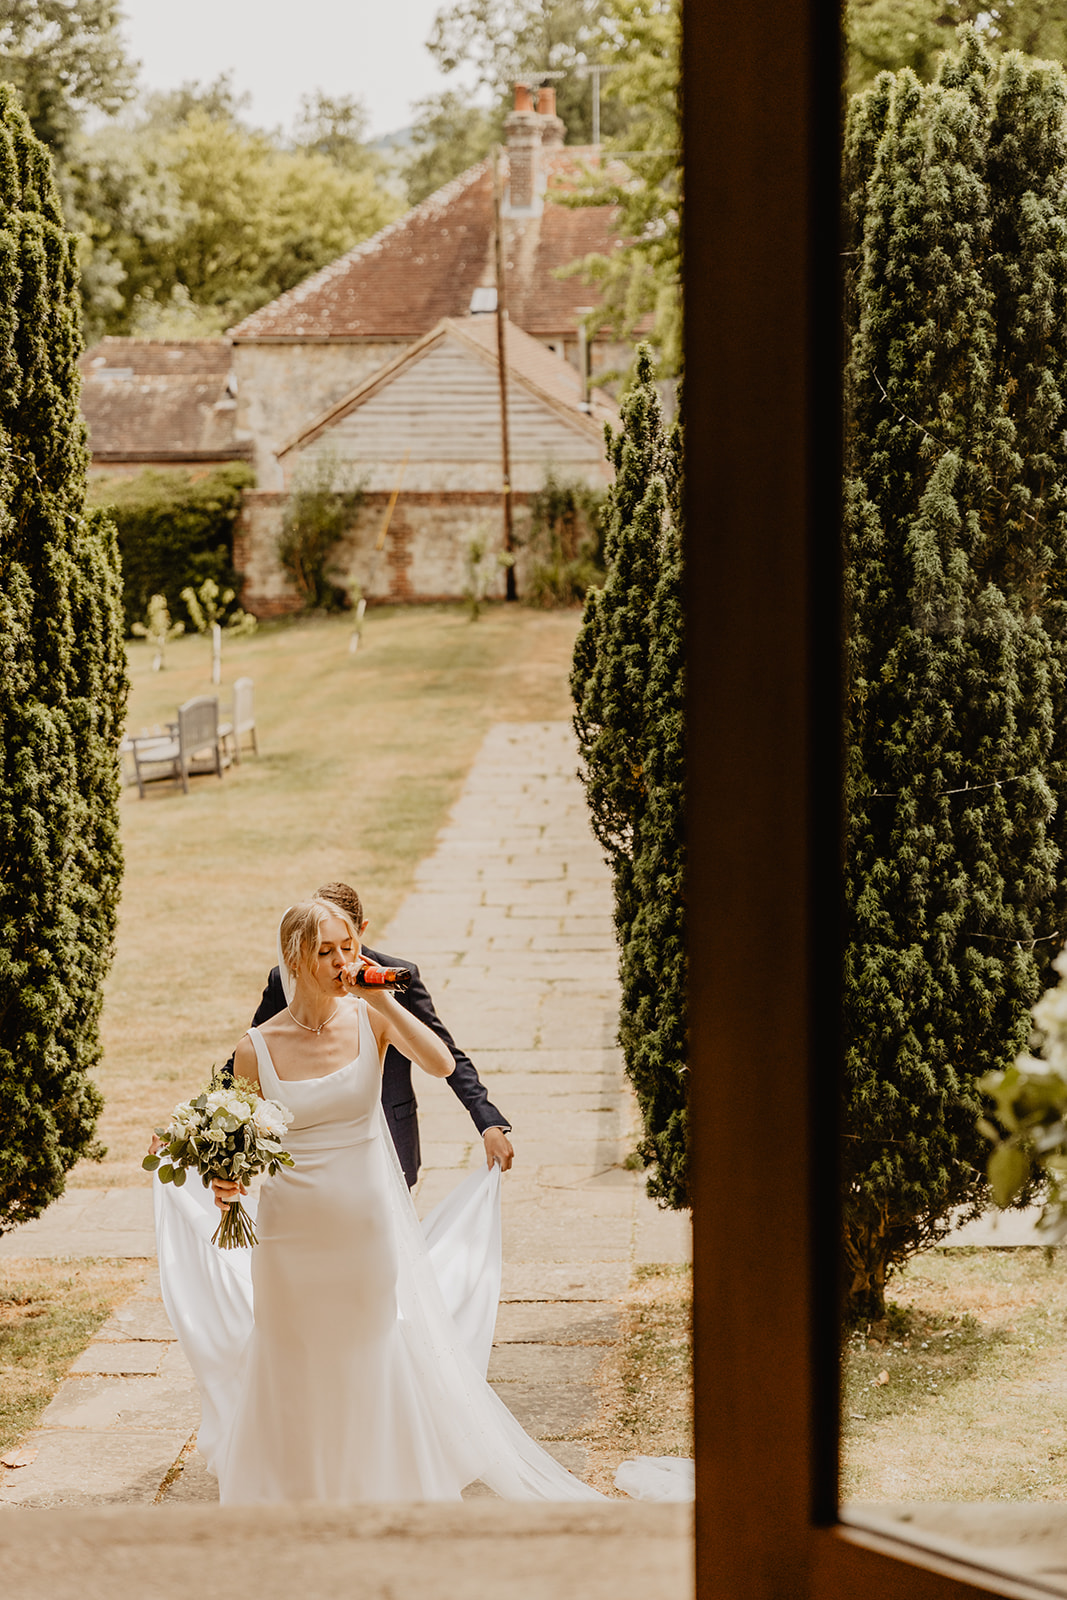 Bride and groom amongst tress and greenery at a Bury Manor Barn Wedding in Sussex. Photographer OliveJoy Photography.